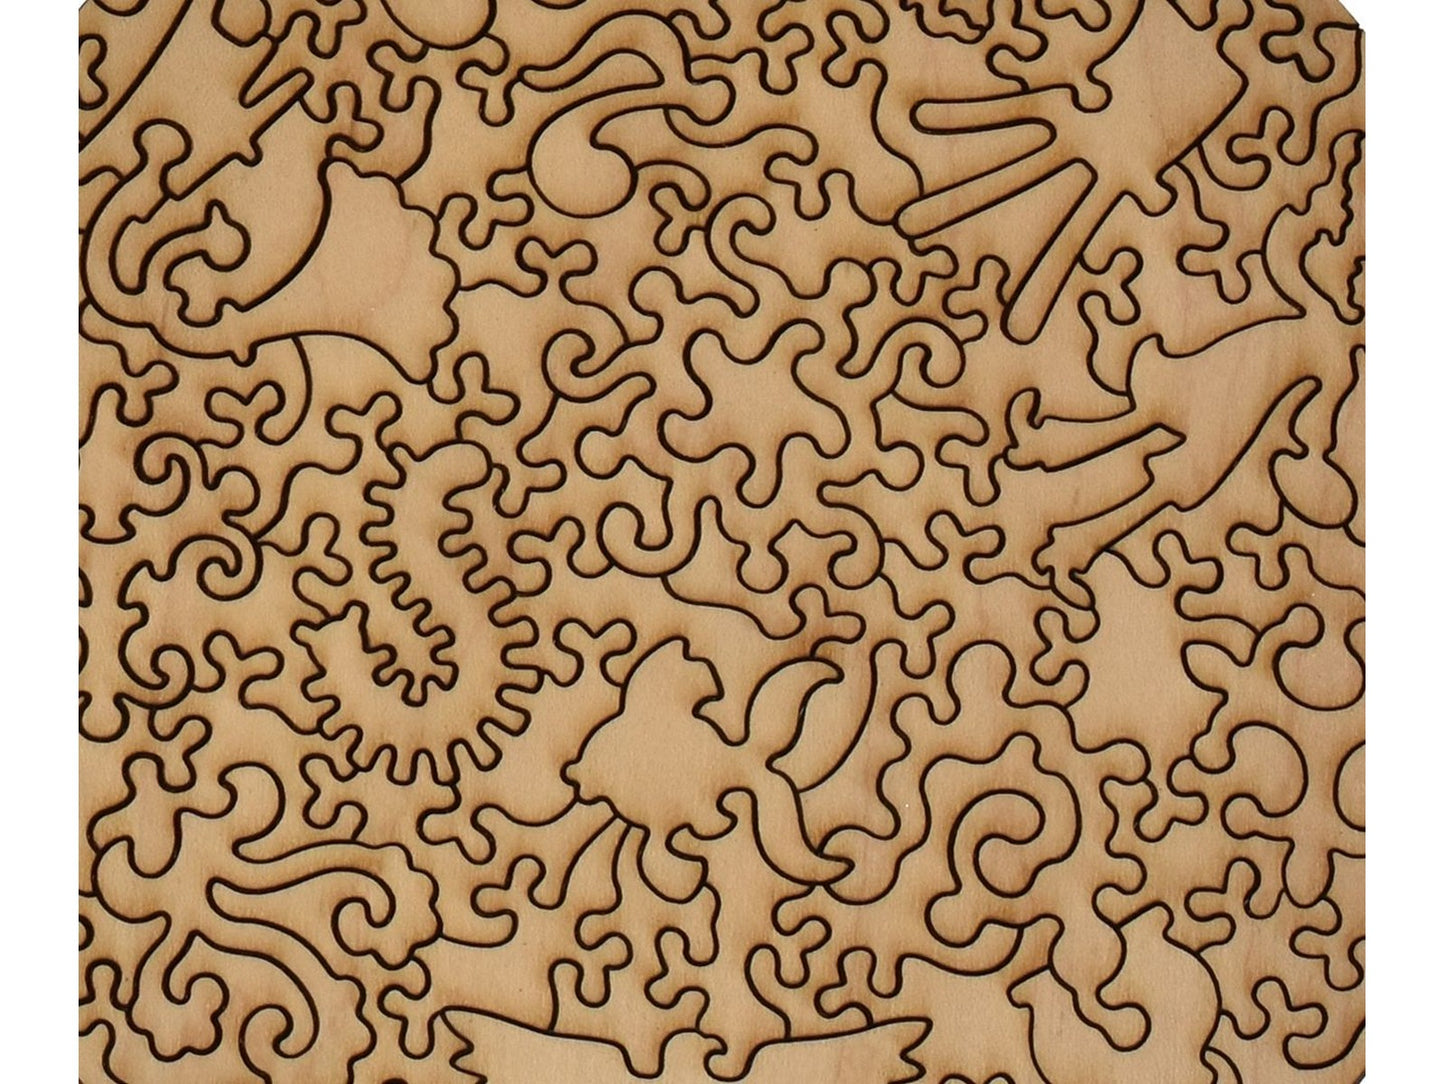 A closeup of the back of the puzzle, Goldfish, showing the detail in the pieces.